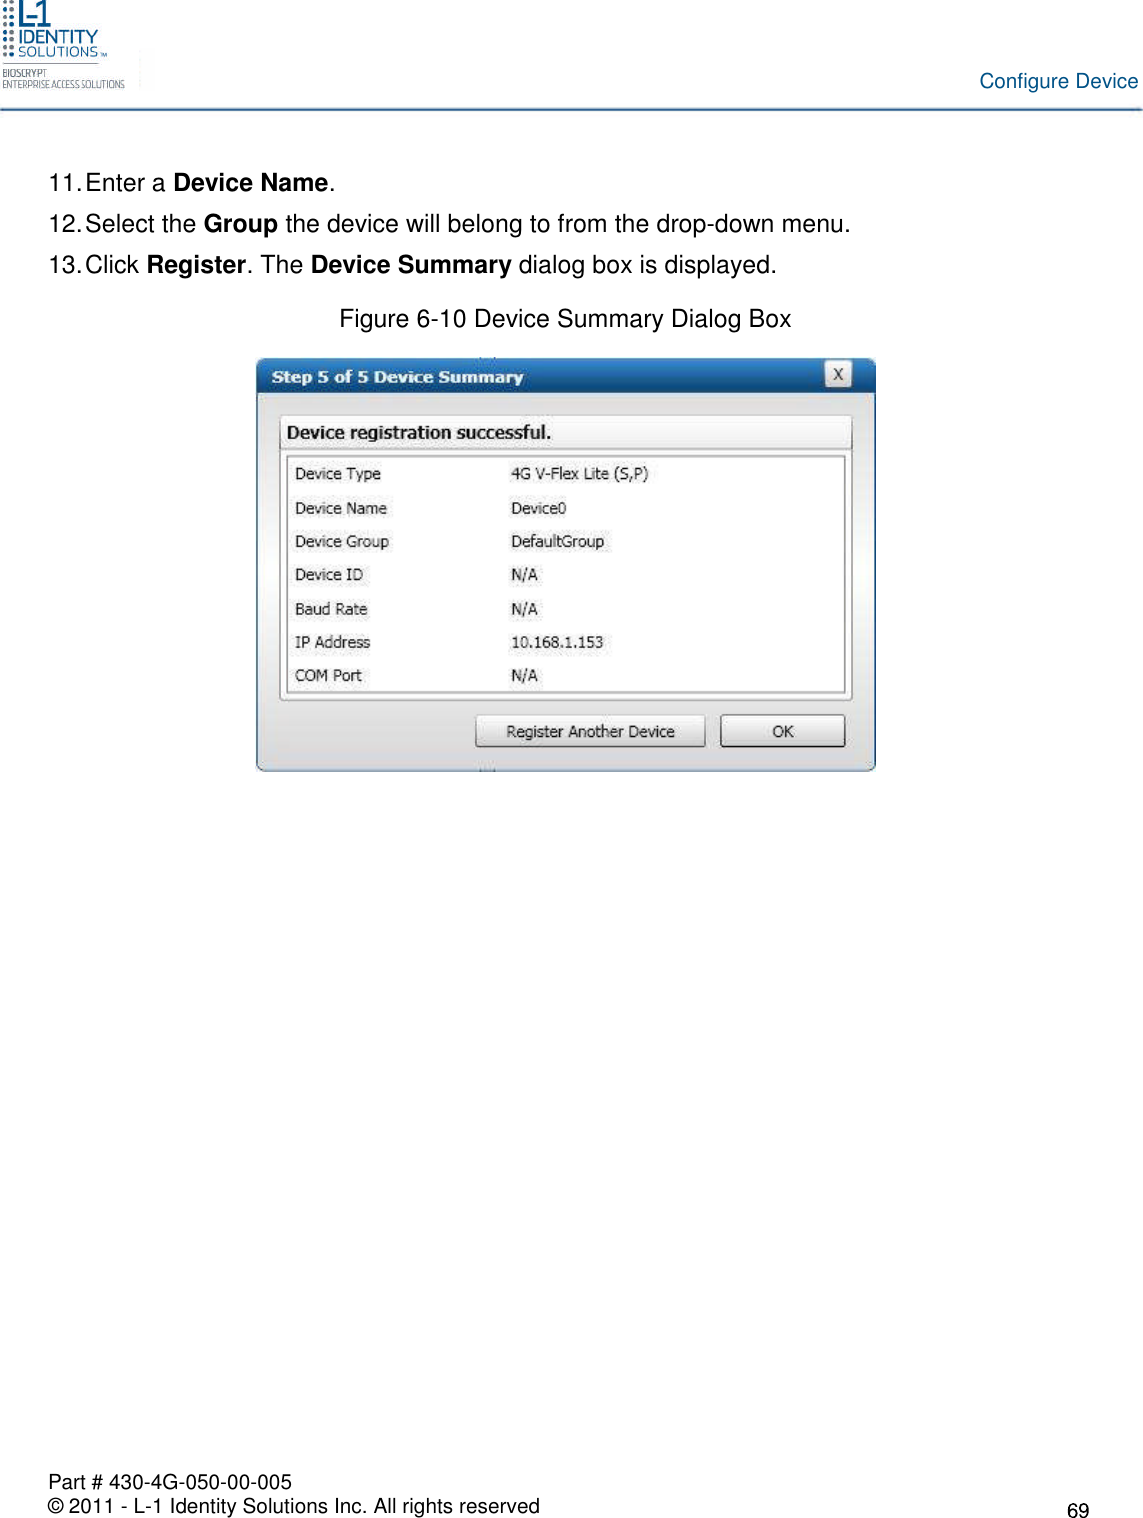 Part # 430-4G-050-00-005© 2011 - L-1 Identity Solutions Inc. All rights reservedConfigure Device11.Enter a Device Name.12.Select the Group the device will belong to from the drop-down menu.13.Click Register. The Device Summary dialog box is displayed.Figure 6-10 Device Summary Dialog Box